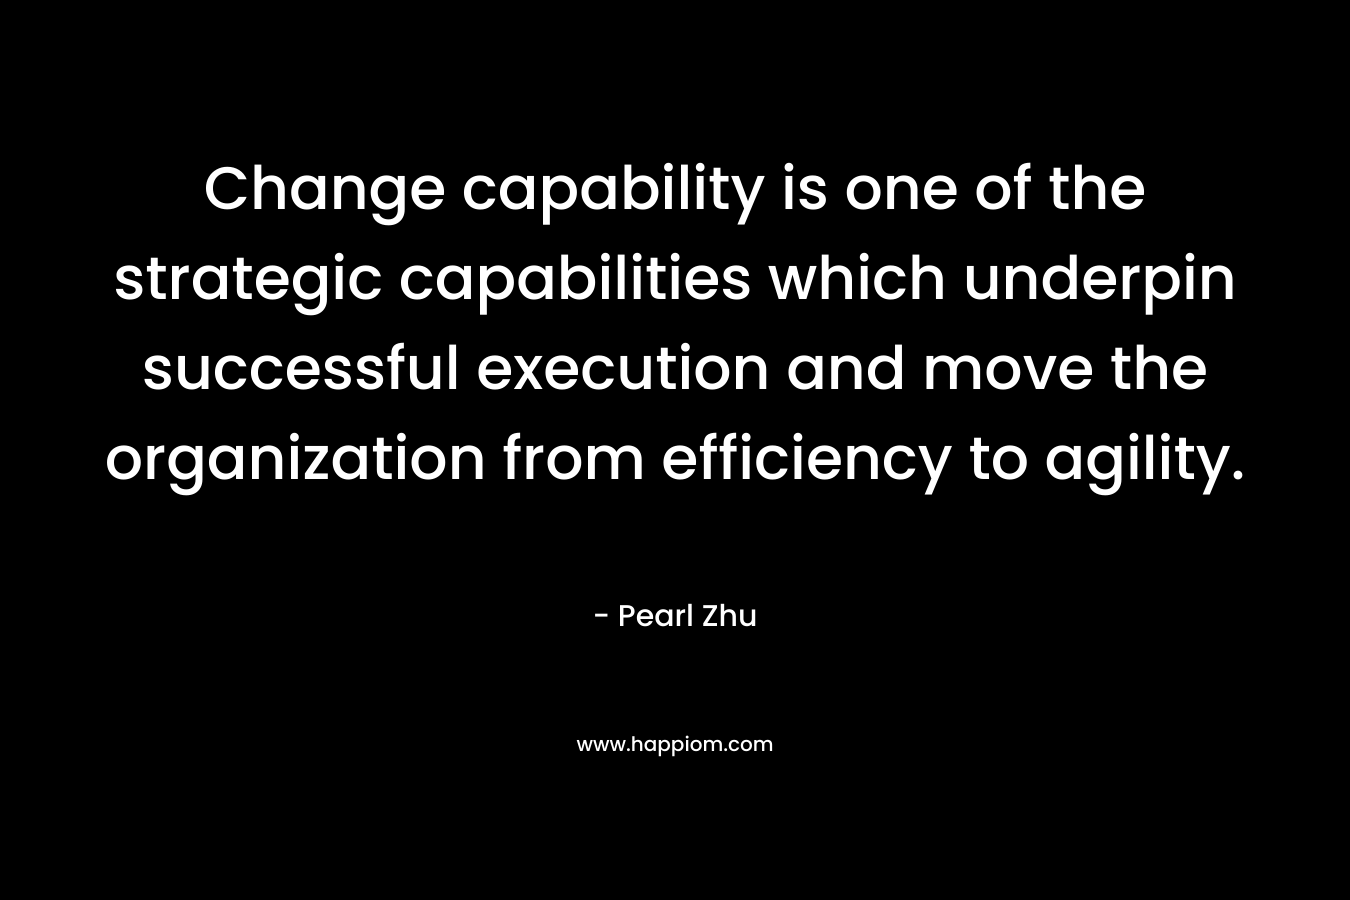 Change capability is one of the strategic capabilities which underpin successful execution and move the organization from efficiency to agility.